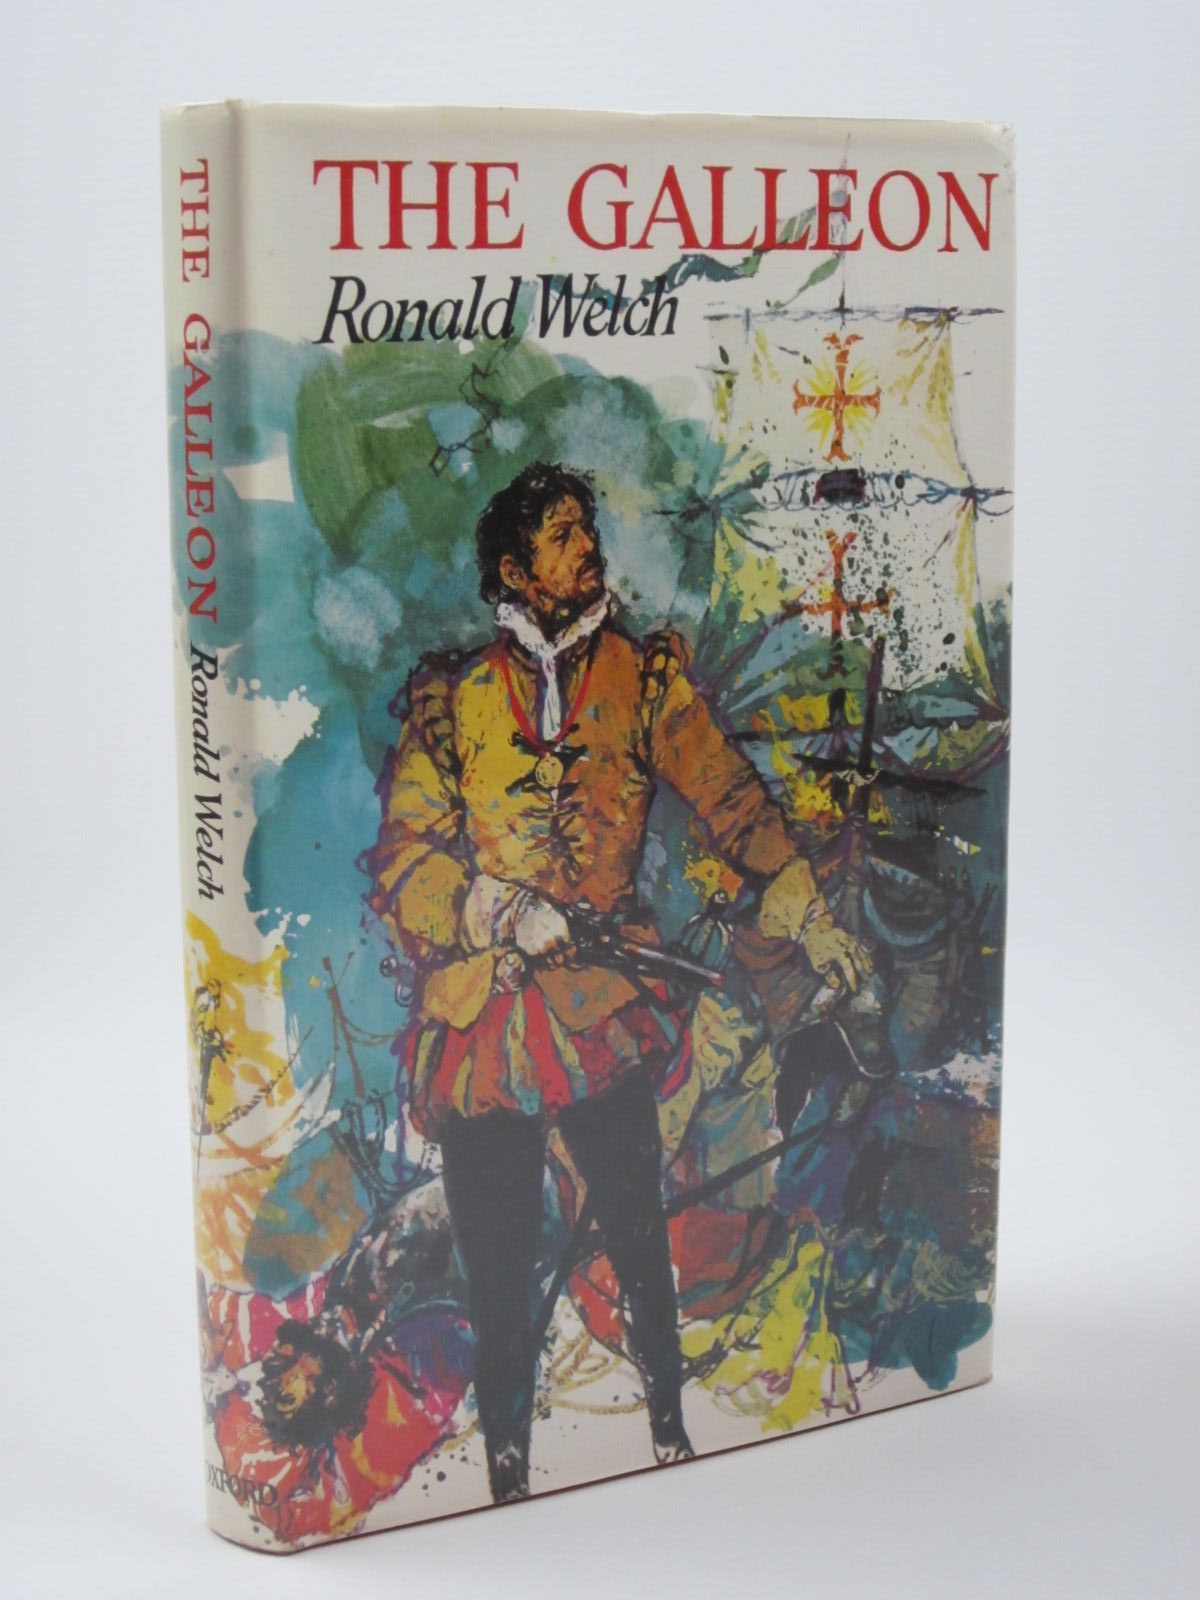 Cover of THE GALLEON by Ronald Welch